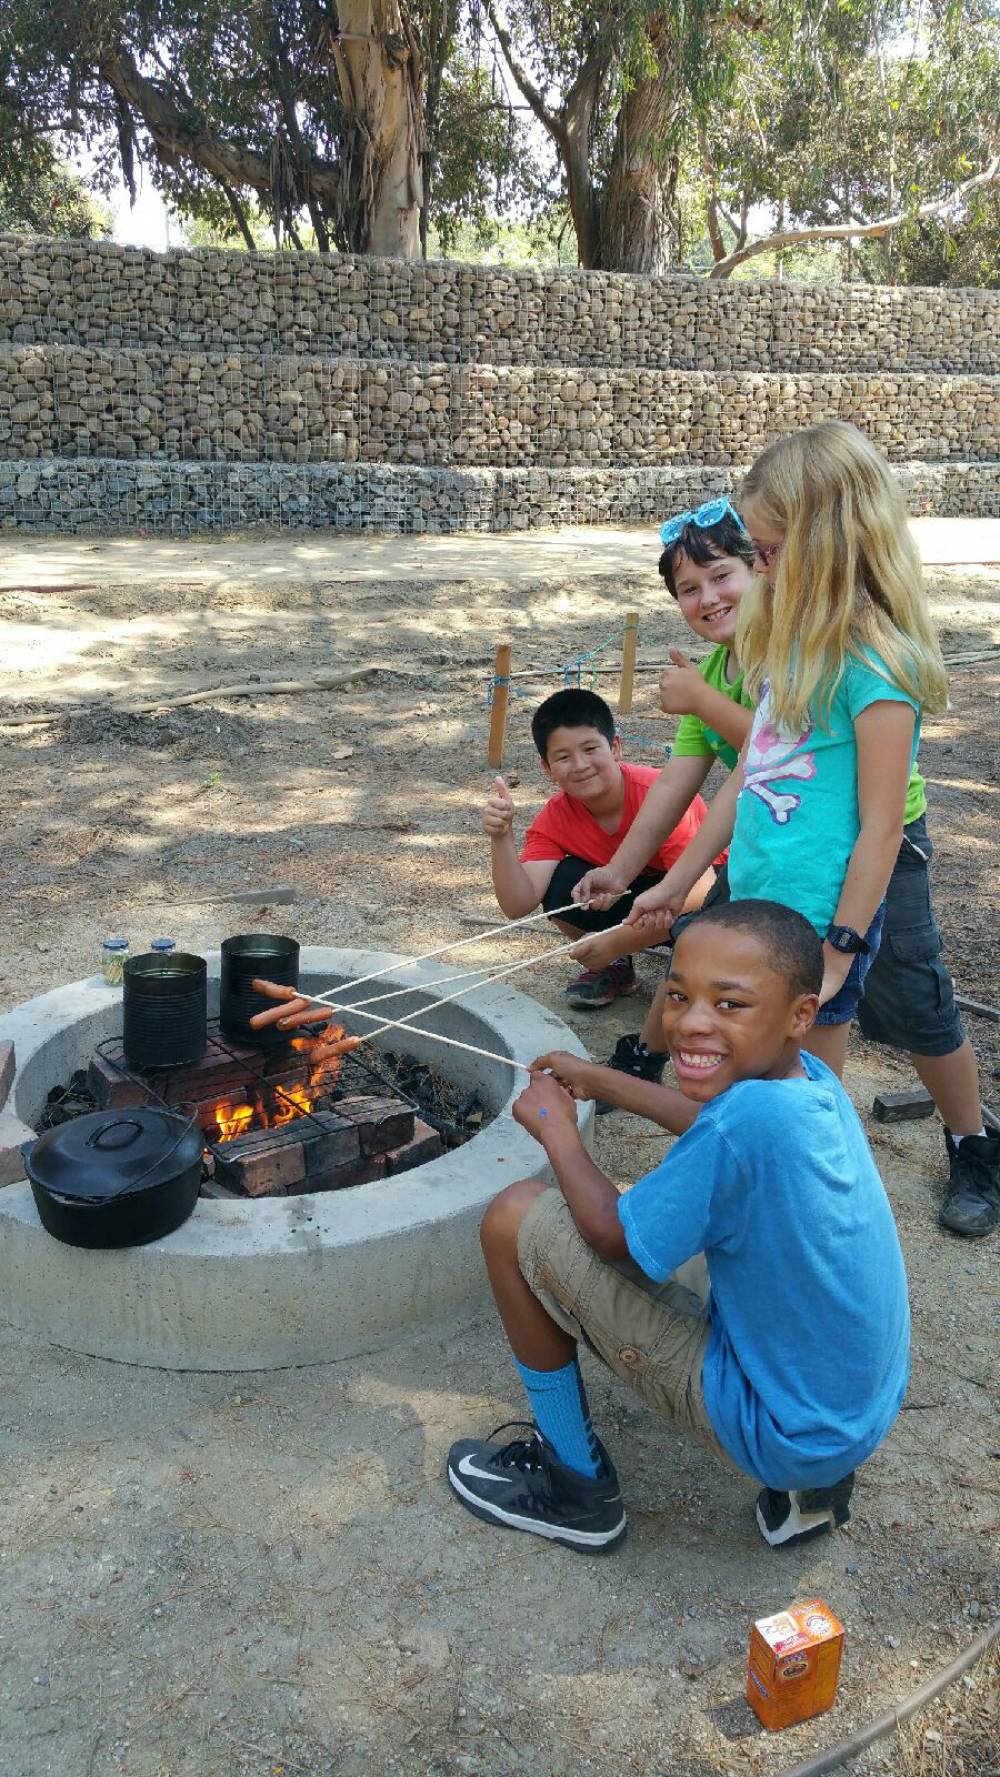 TOP CALIFORNIA WILDERNESS CAMP: Backyard Bunch is a Top Wilderness Summer Camp located in Long Beach California offering many fun and enriching Wilderness and other camp programs. 